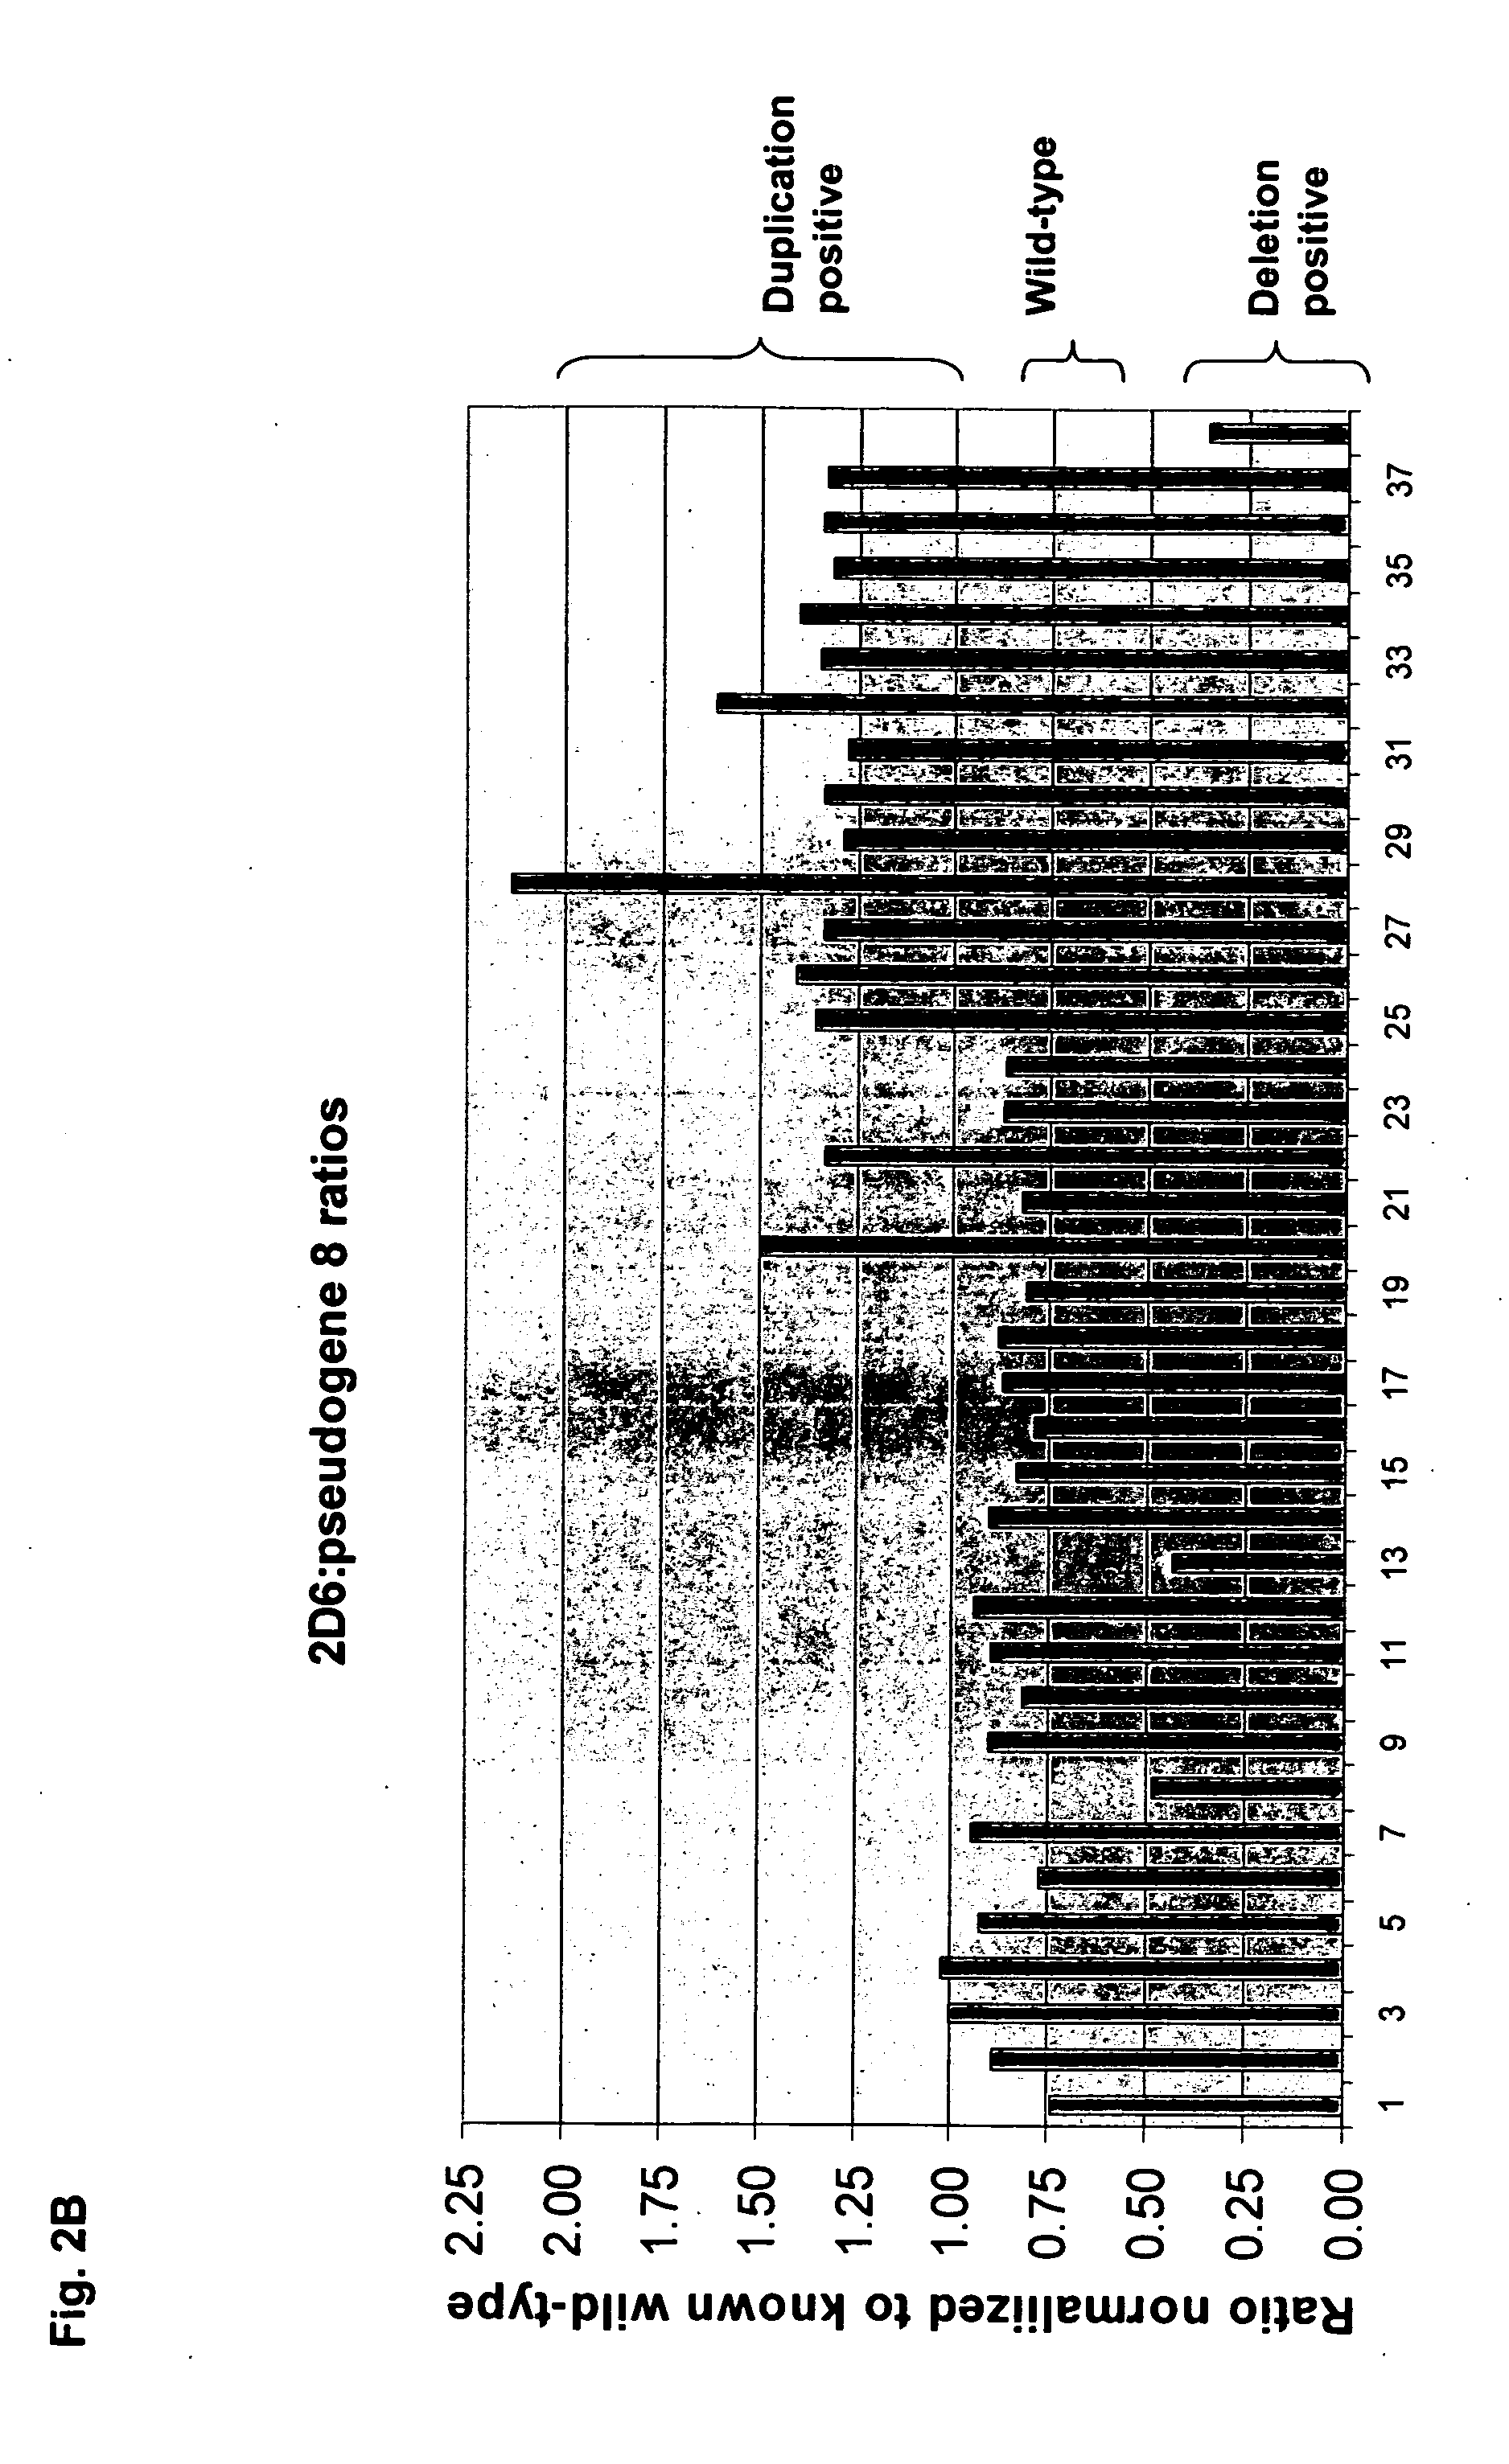 Method for detecting large mutations and duplications using control amplification comparisons to paralogous genes